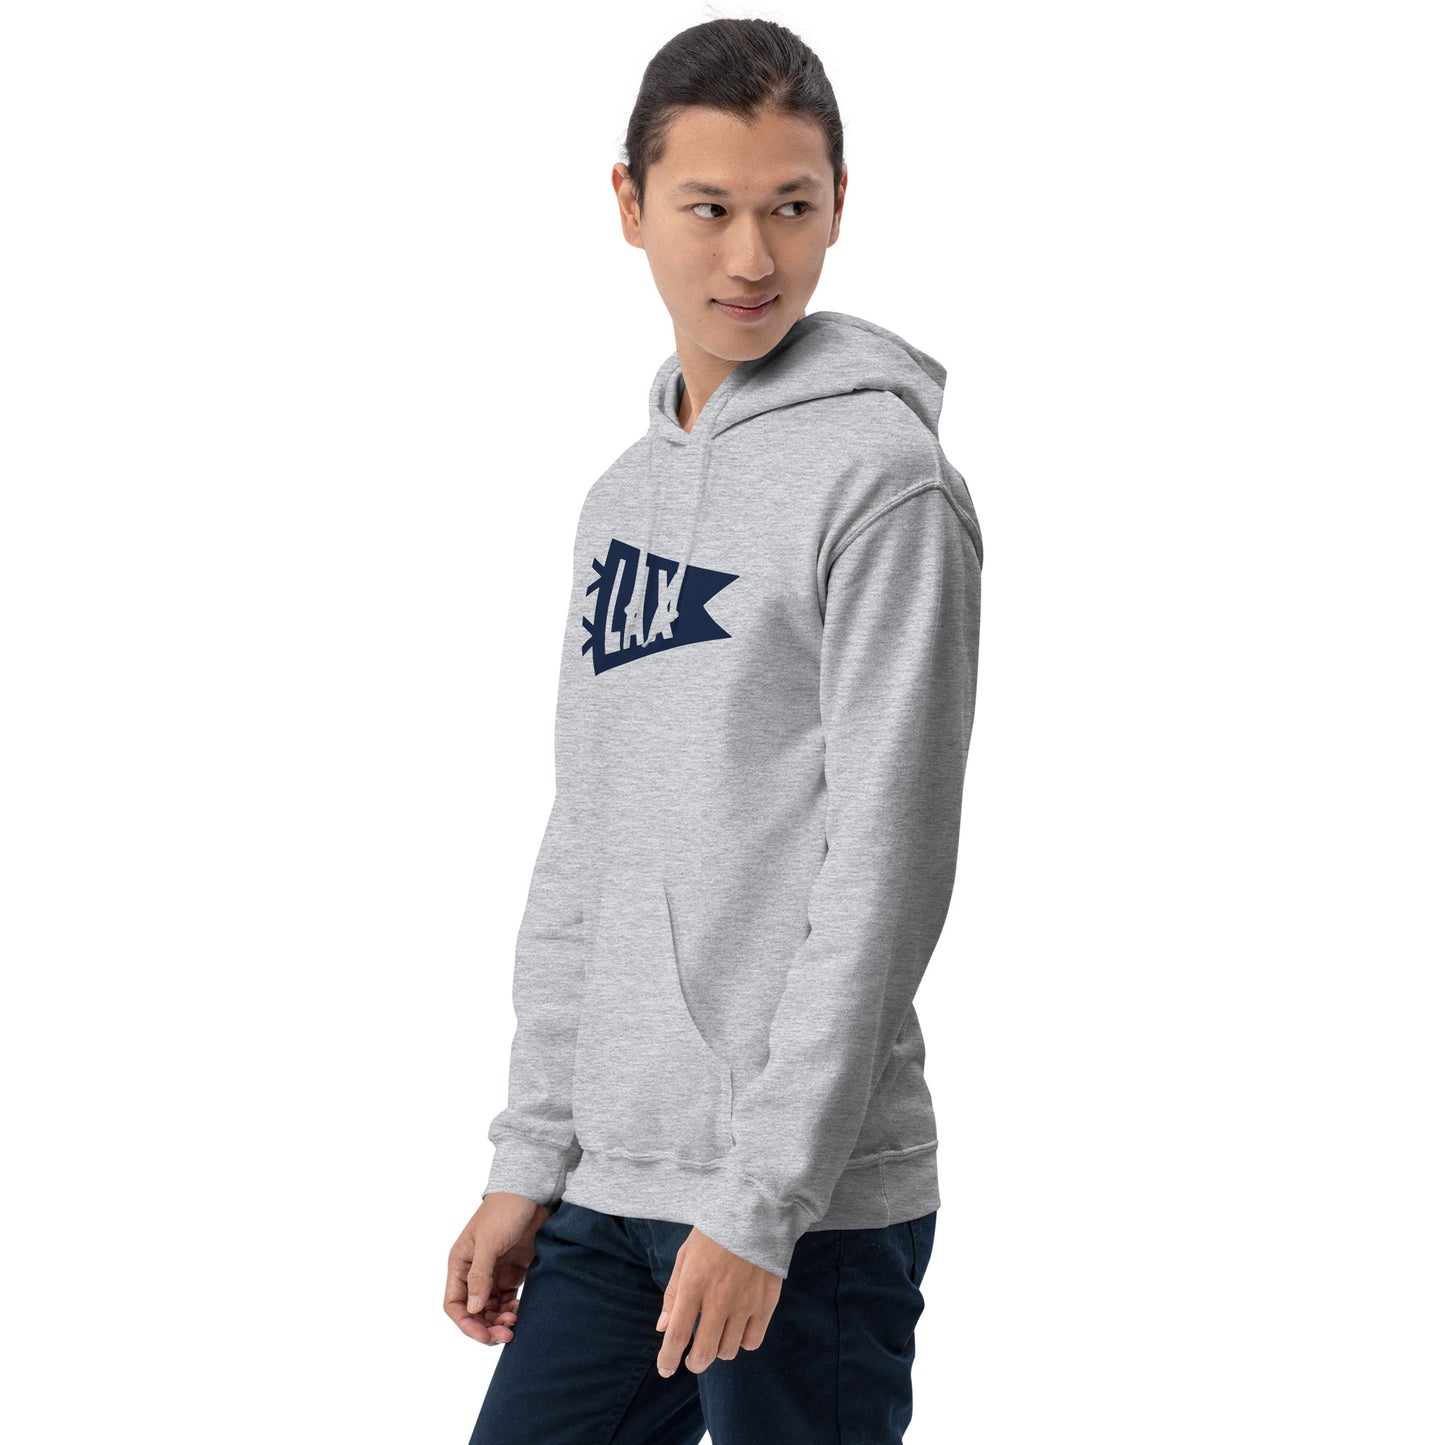 Airport Code Unisex Hoodie - Navy Blue Graphic • LAX Los Angeles • YHM Designs - Image 10